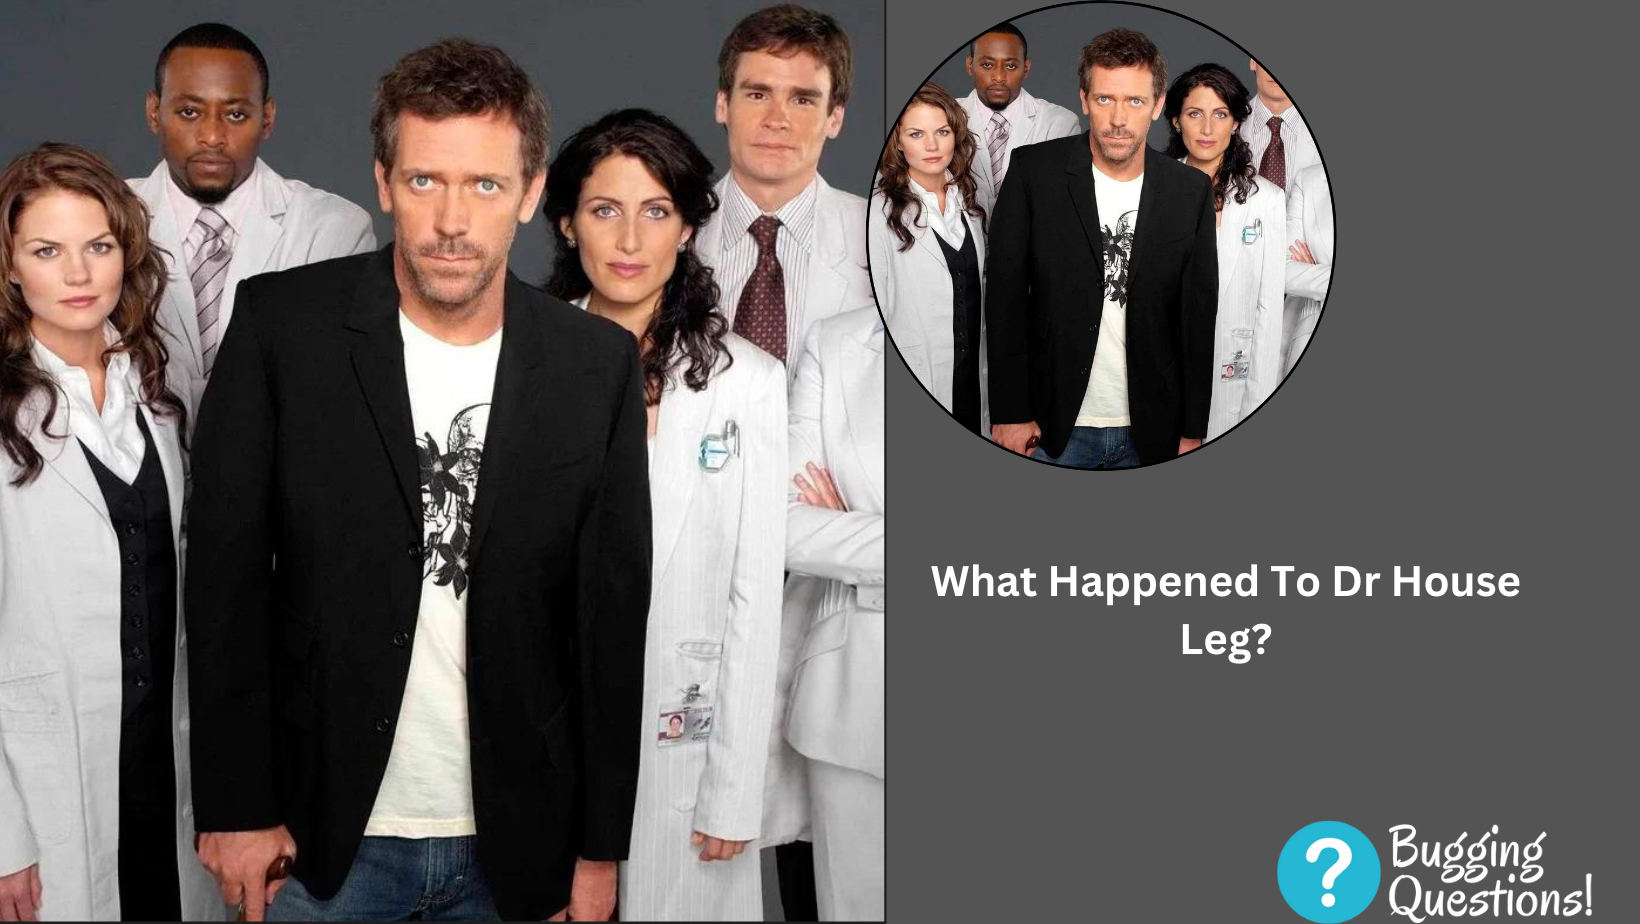 What Happened To Dr House Leg?